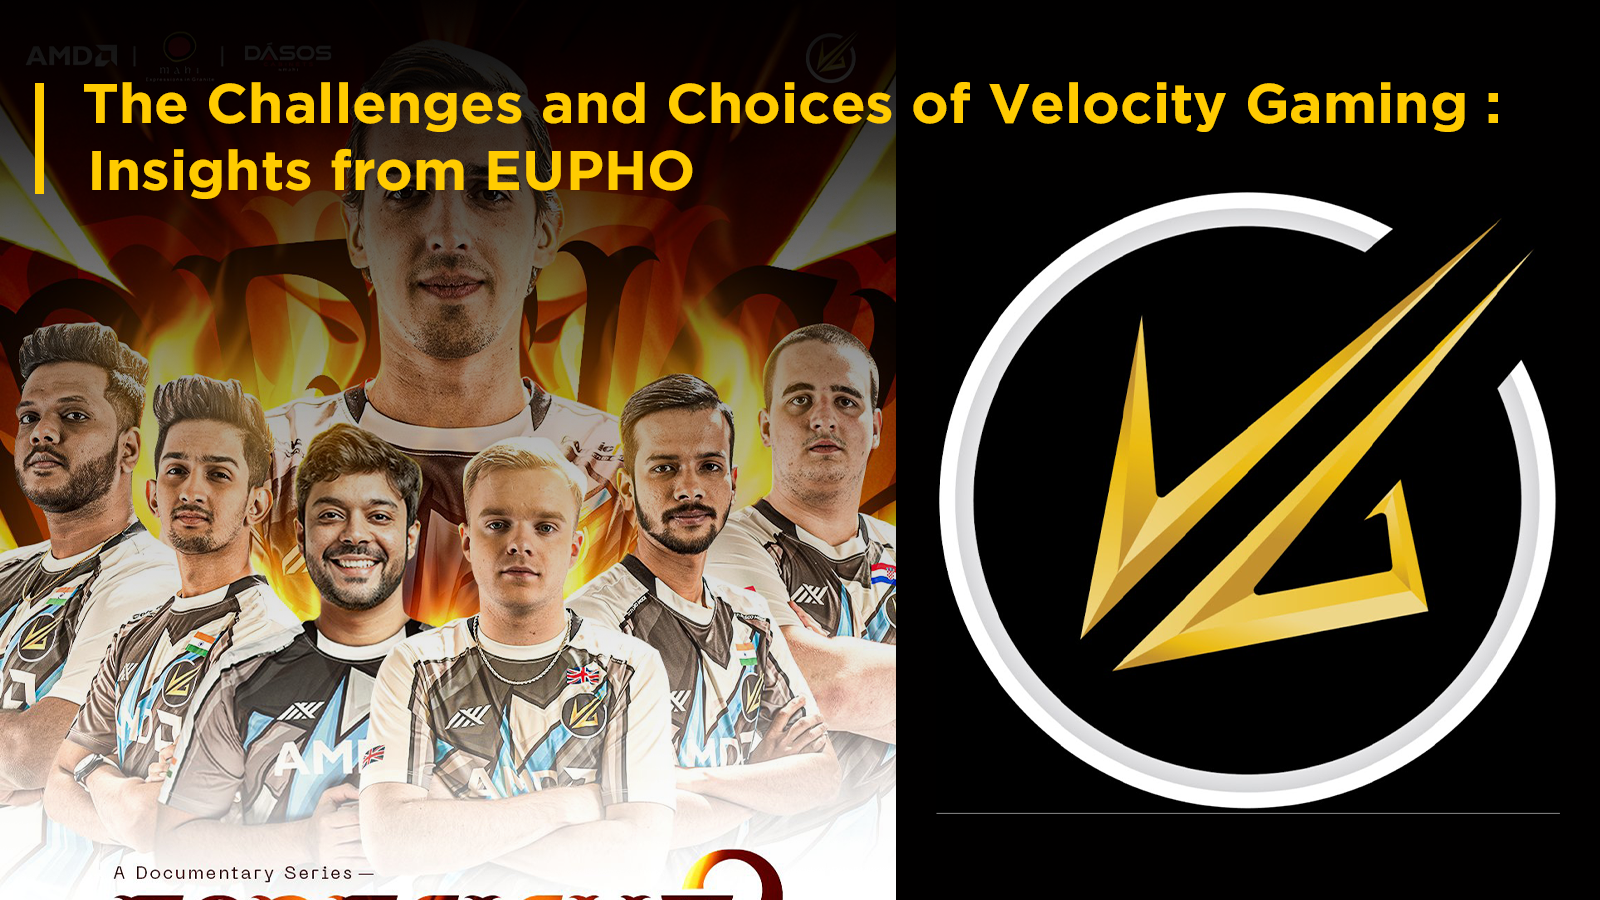 The Challenges and Choices of Velocity Gaming: Insights from EUPHO